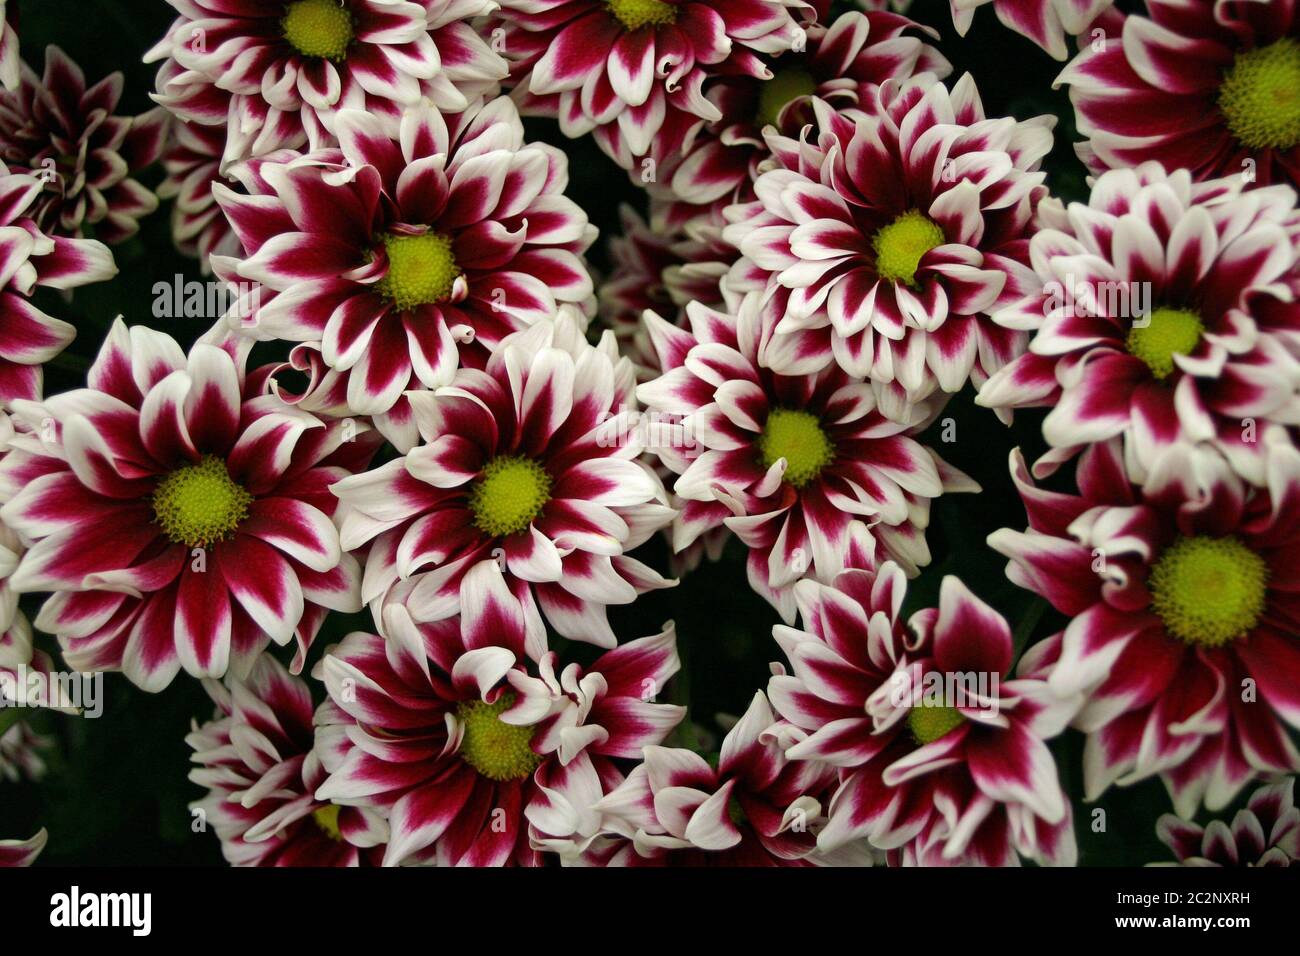 Red and white edged flowers with yellow centres that forms a collage. Could be used as a background. Stock Photo